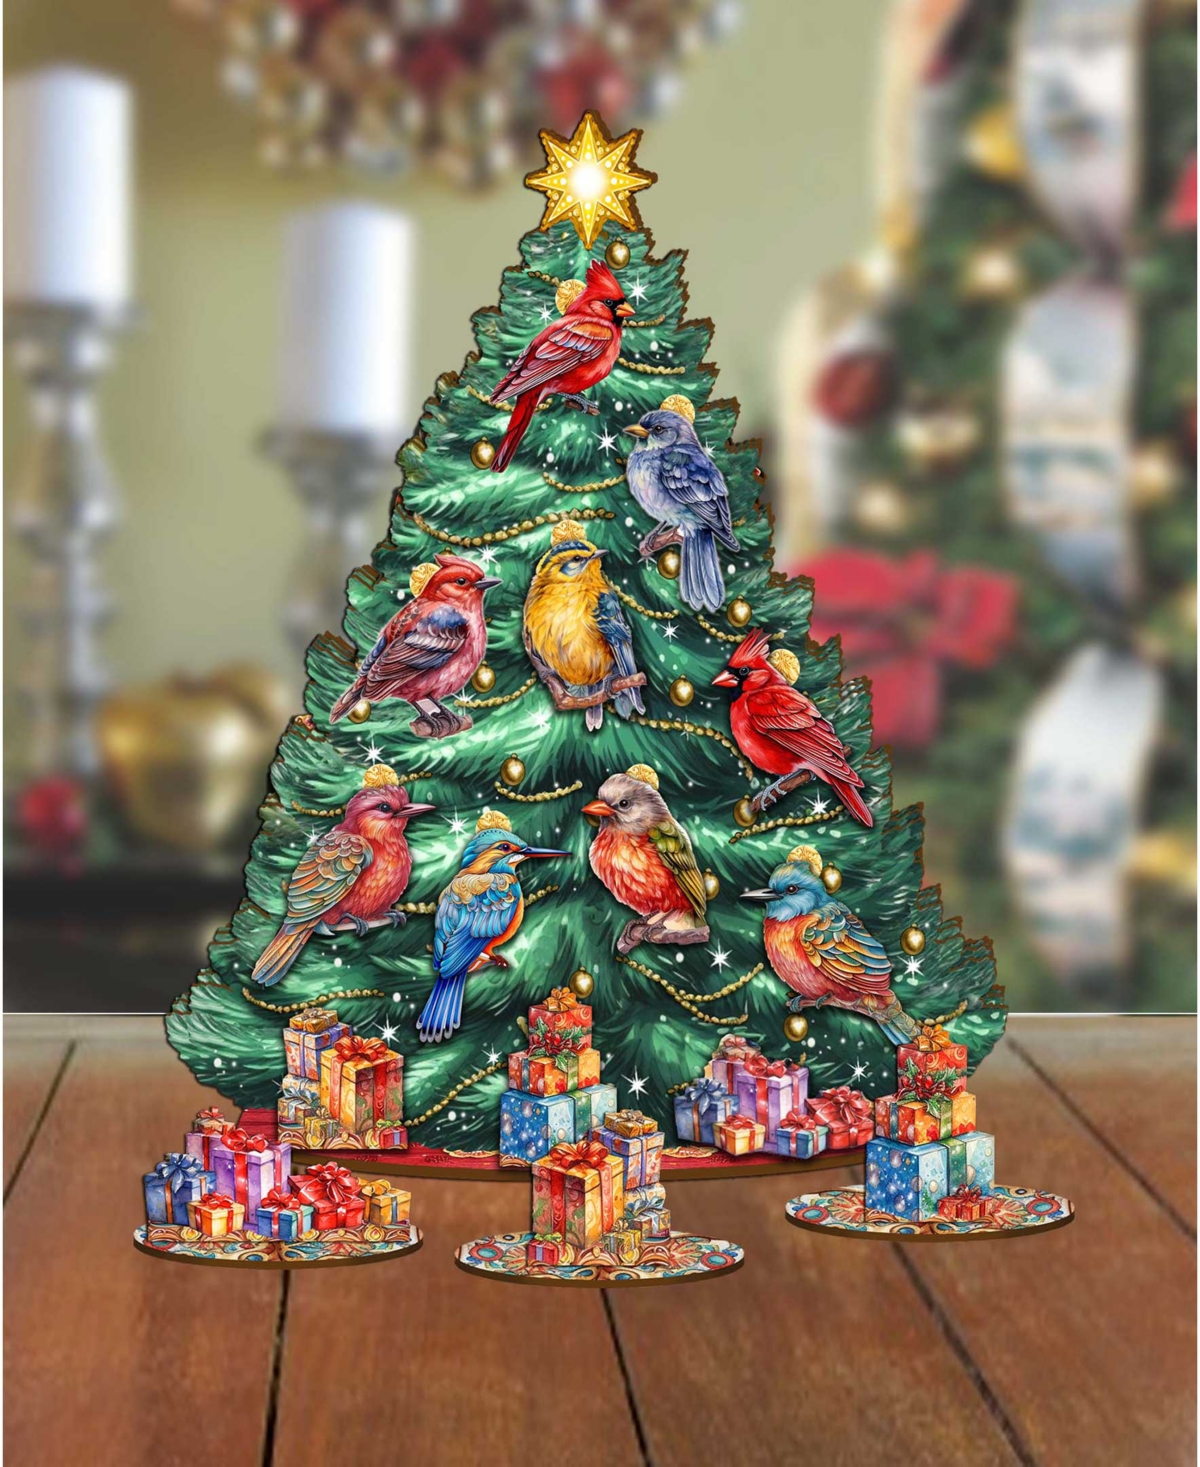 Shop Designocracy Christmas Birds Themed Wooden Christmas Tree With Ornaments Set Of 13 G. Debrekht In Multi Color